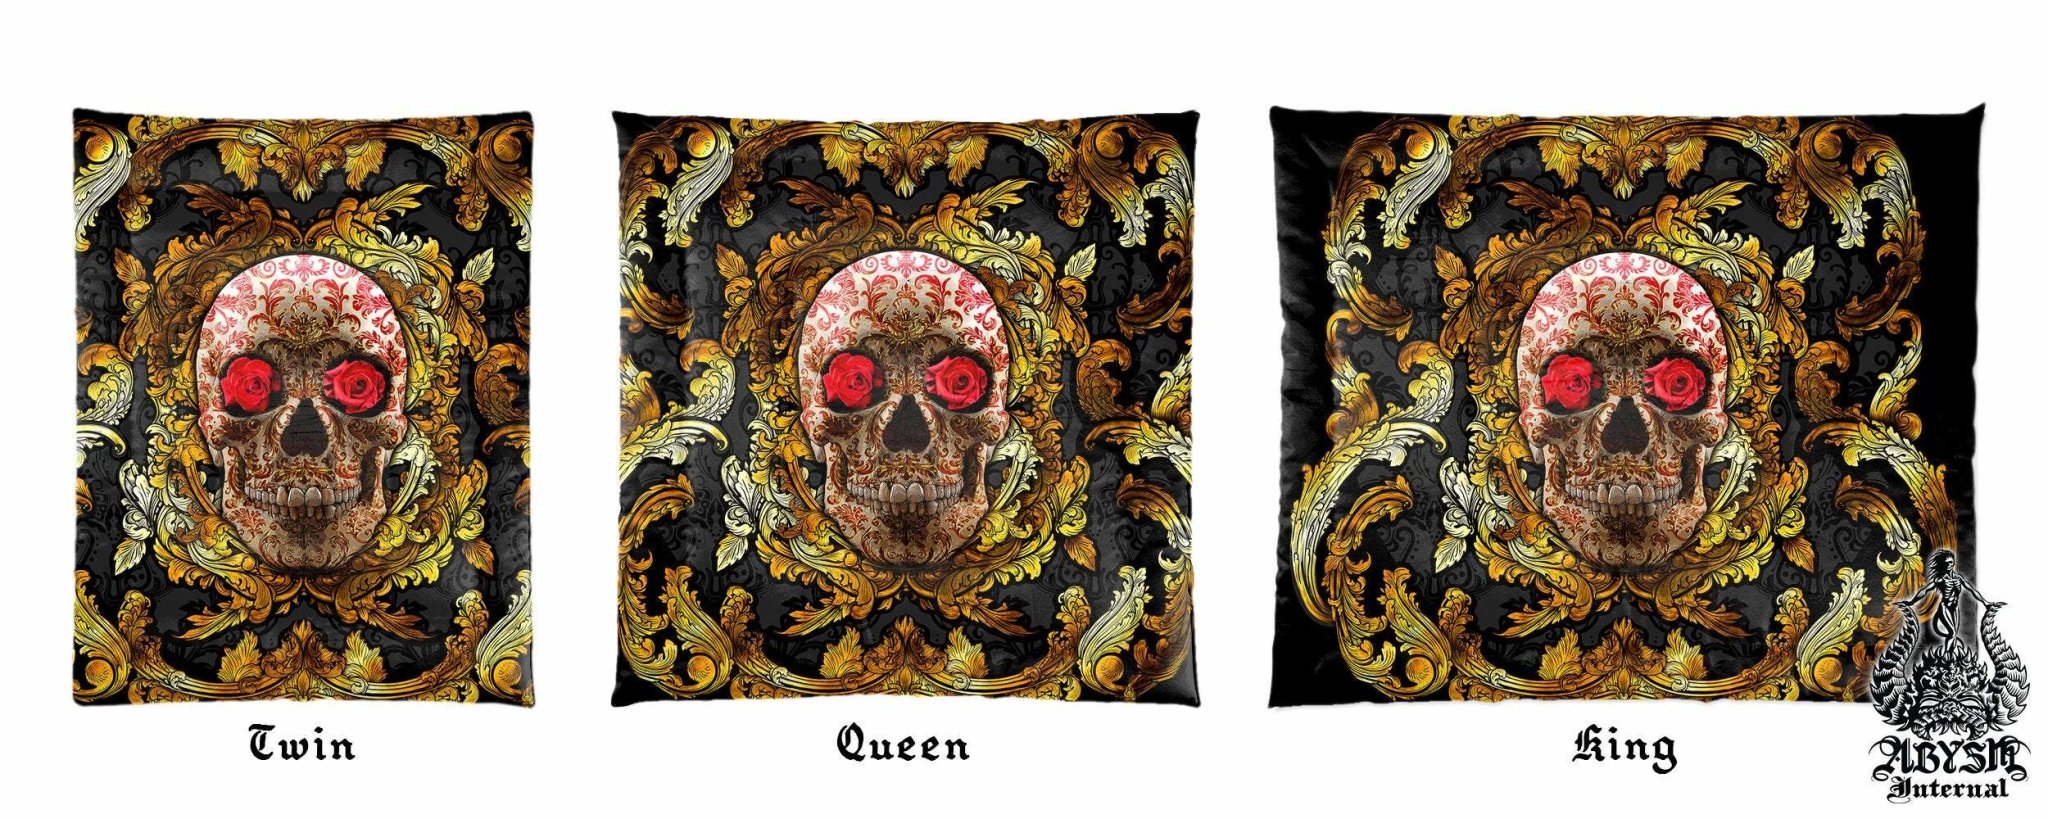 Skull Bedding Set, Comforter and Duvet, Victorian Gothic Bed Cover and Bedroom Decor, King, Queen and Twin Size - Gold and Red Roses - Abysm Internal